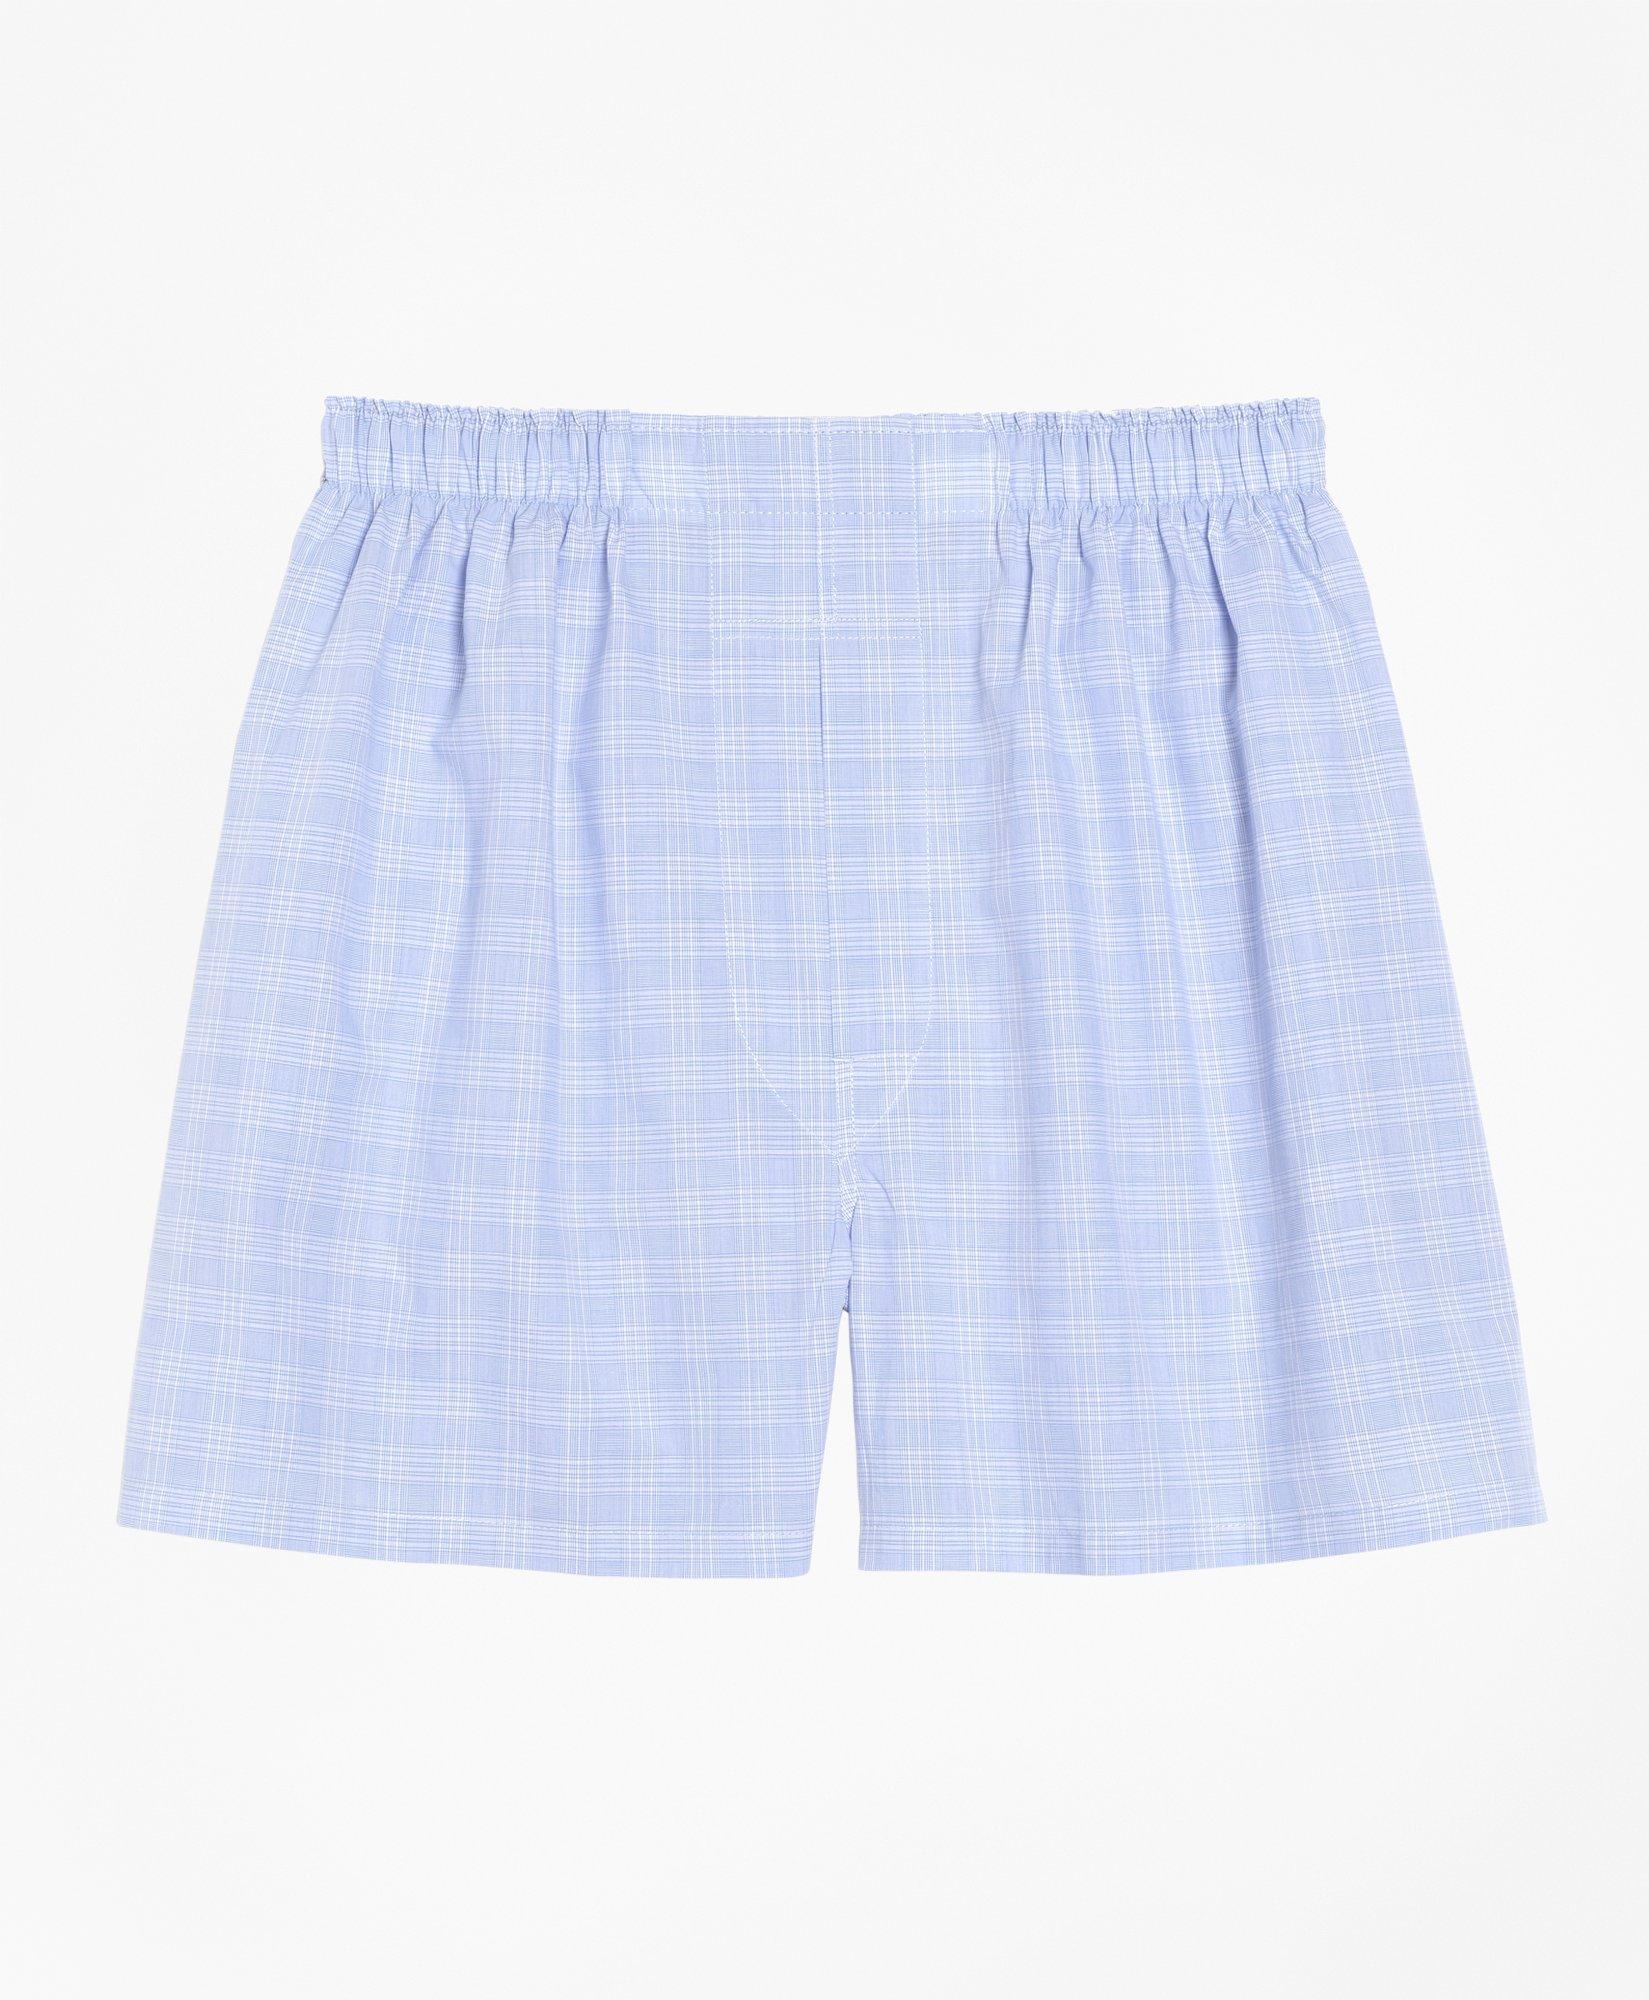 Shop Brooks Brothers Traditional Fit Glen Plaid Boxers | Blue | Size Large